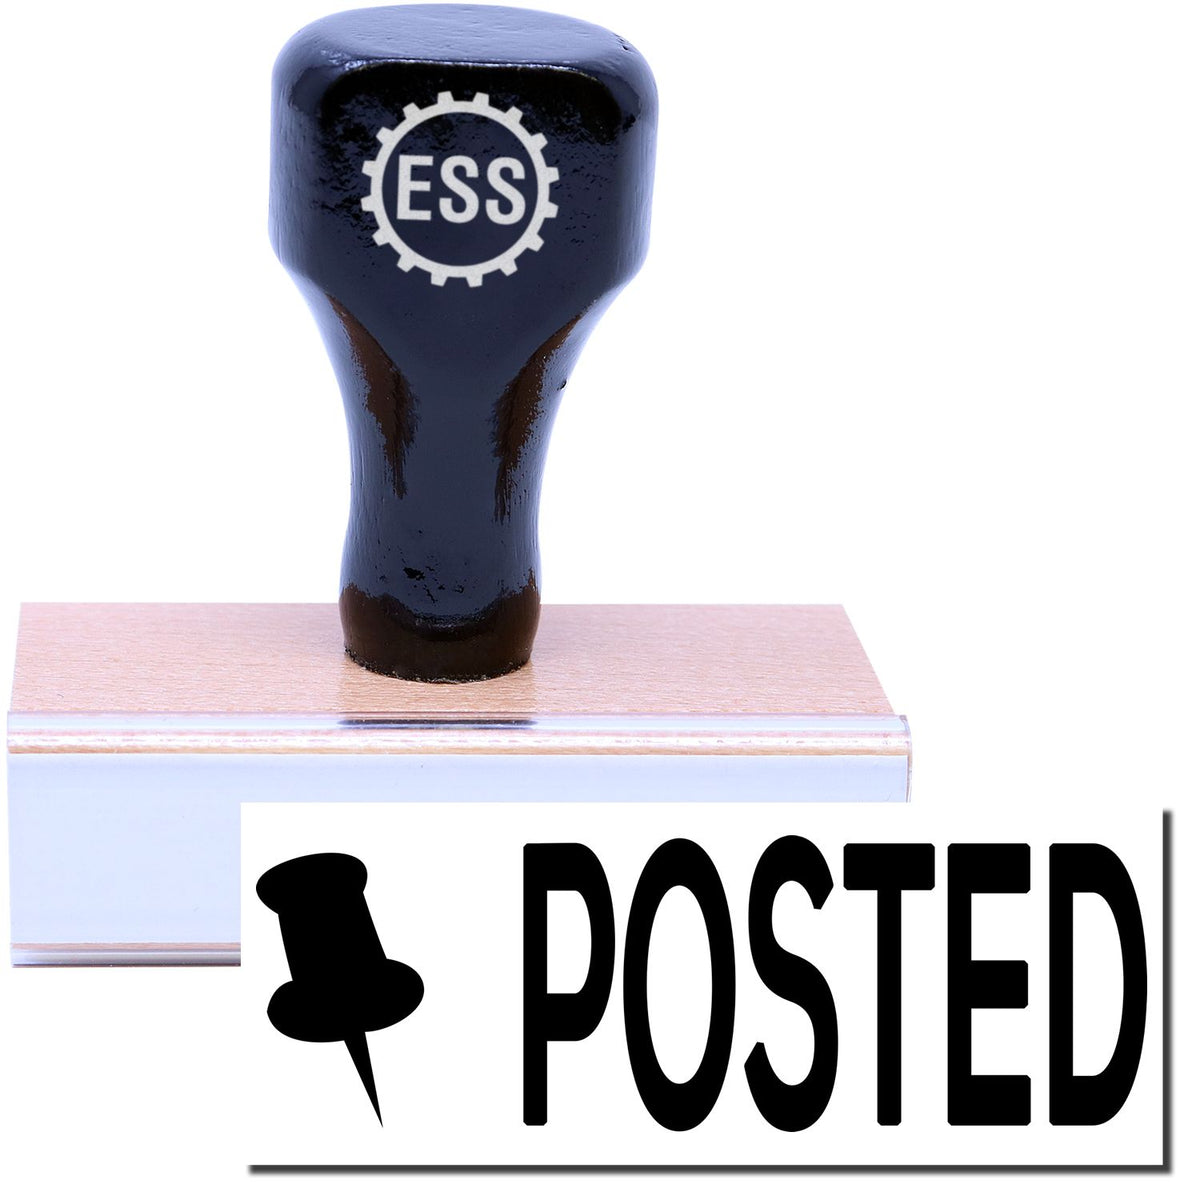 A stock office rubber stamp with a stamped image showing how the text &quot;POSTED &quot; in a large bold font with a thumbtack image on the left side is displayed after stamping.